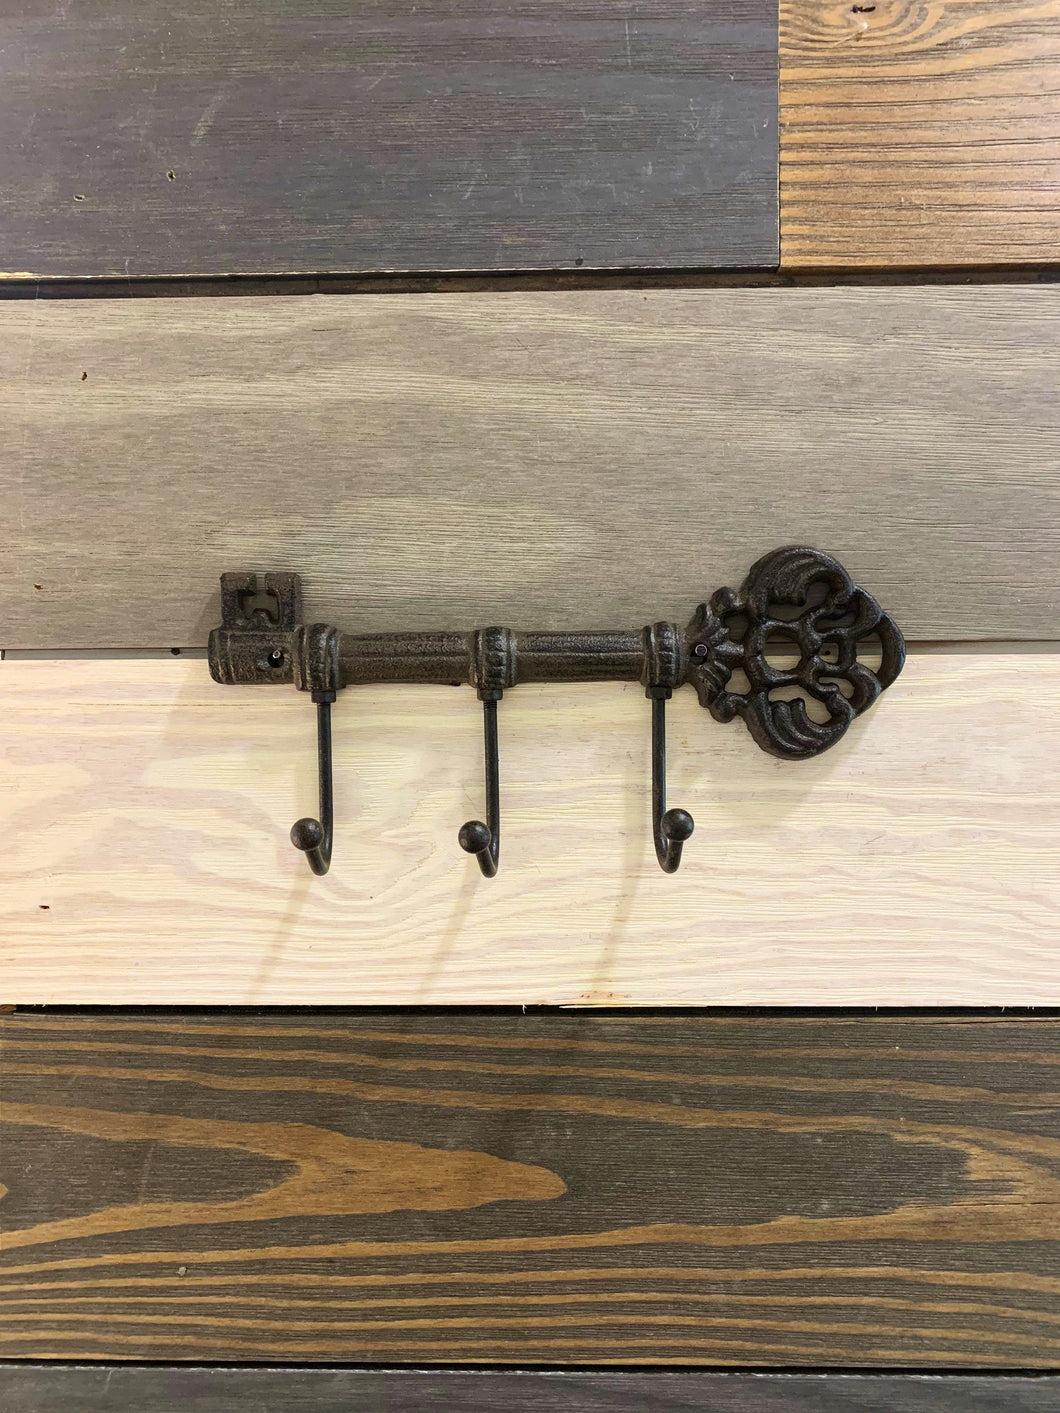 Cast Iron Key with hooks, Wall Decor, Antique Style Key with three hooks made of Cast Iron, Rustic Cast Iron Key Rack, Skeleton Key Rack